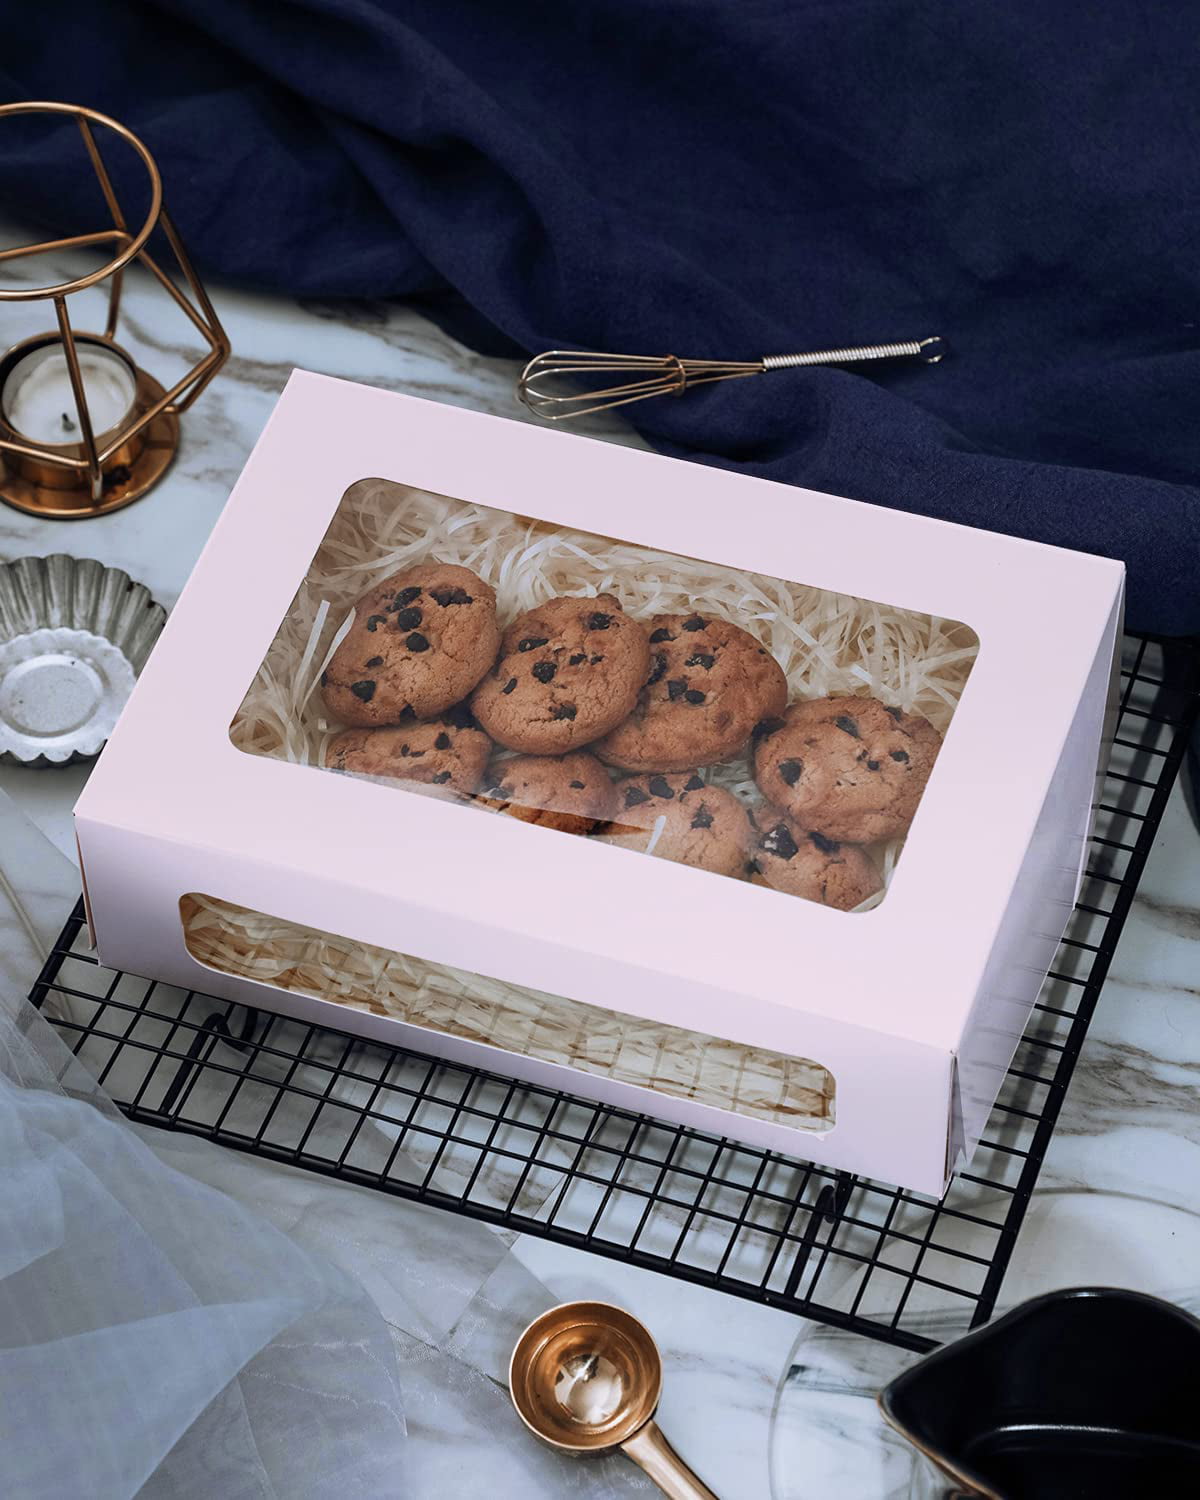 Yotruth 9x6x2.5 Cookie Box with Window Gift Bakery Boxes 50 Pack White Cookie Box Pop-up Easy Assembly Treat Box